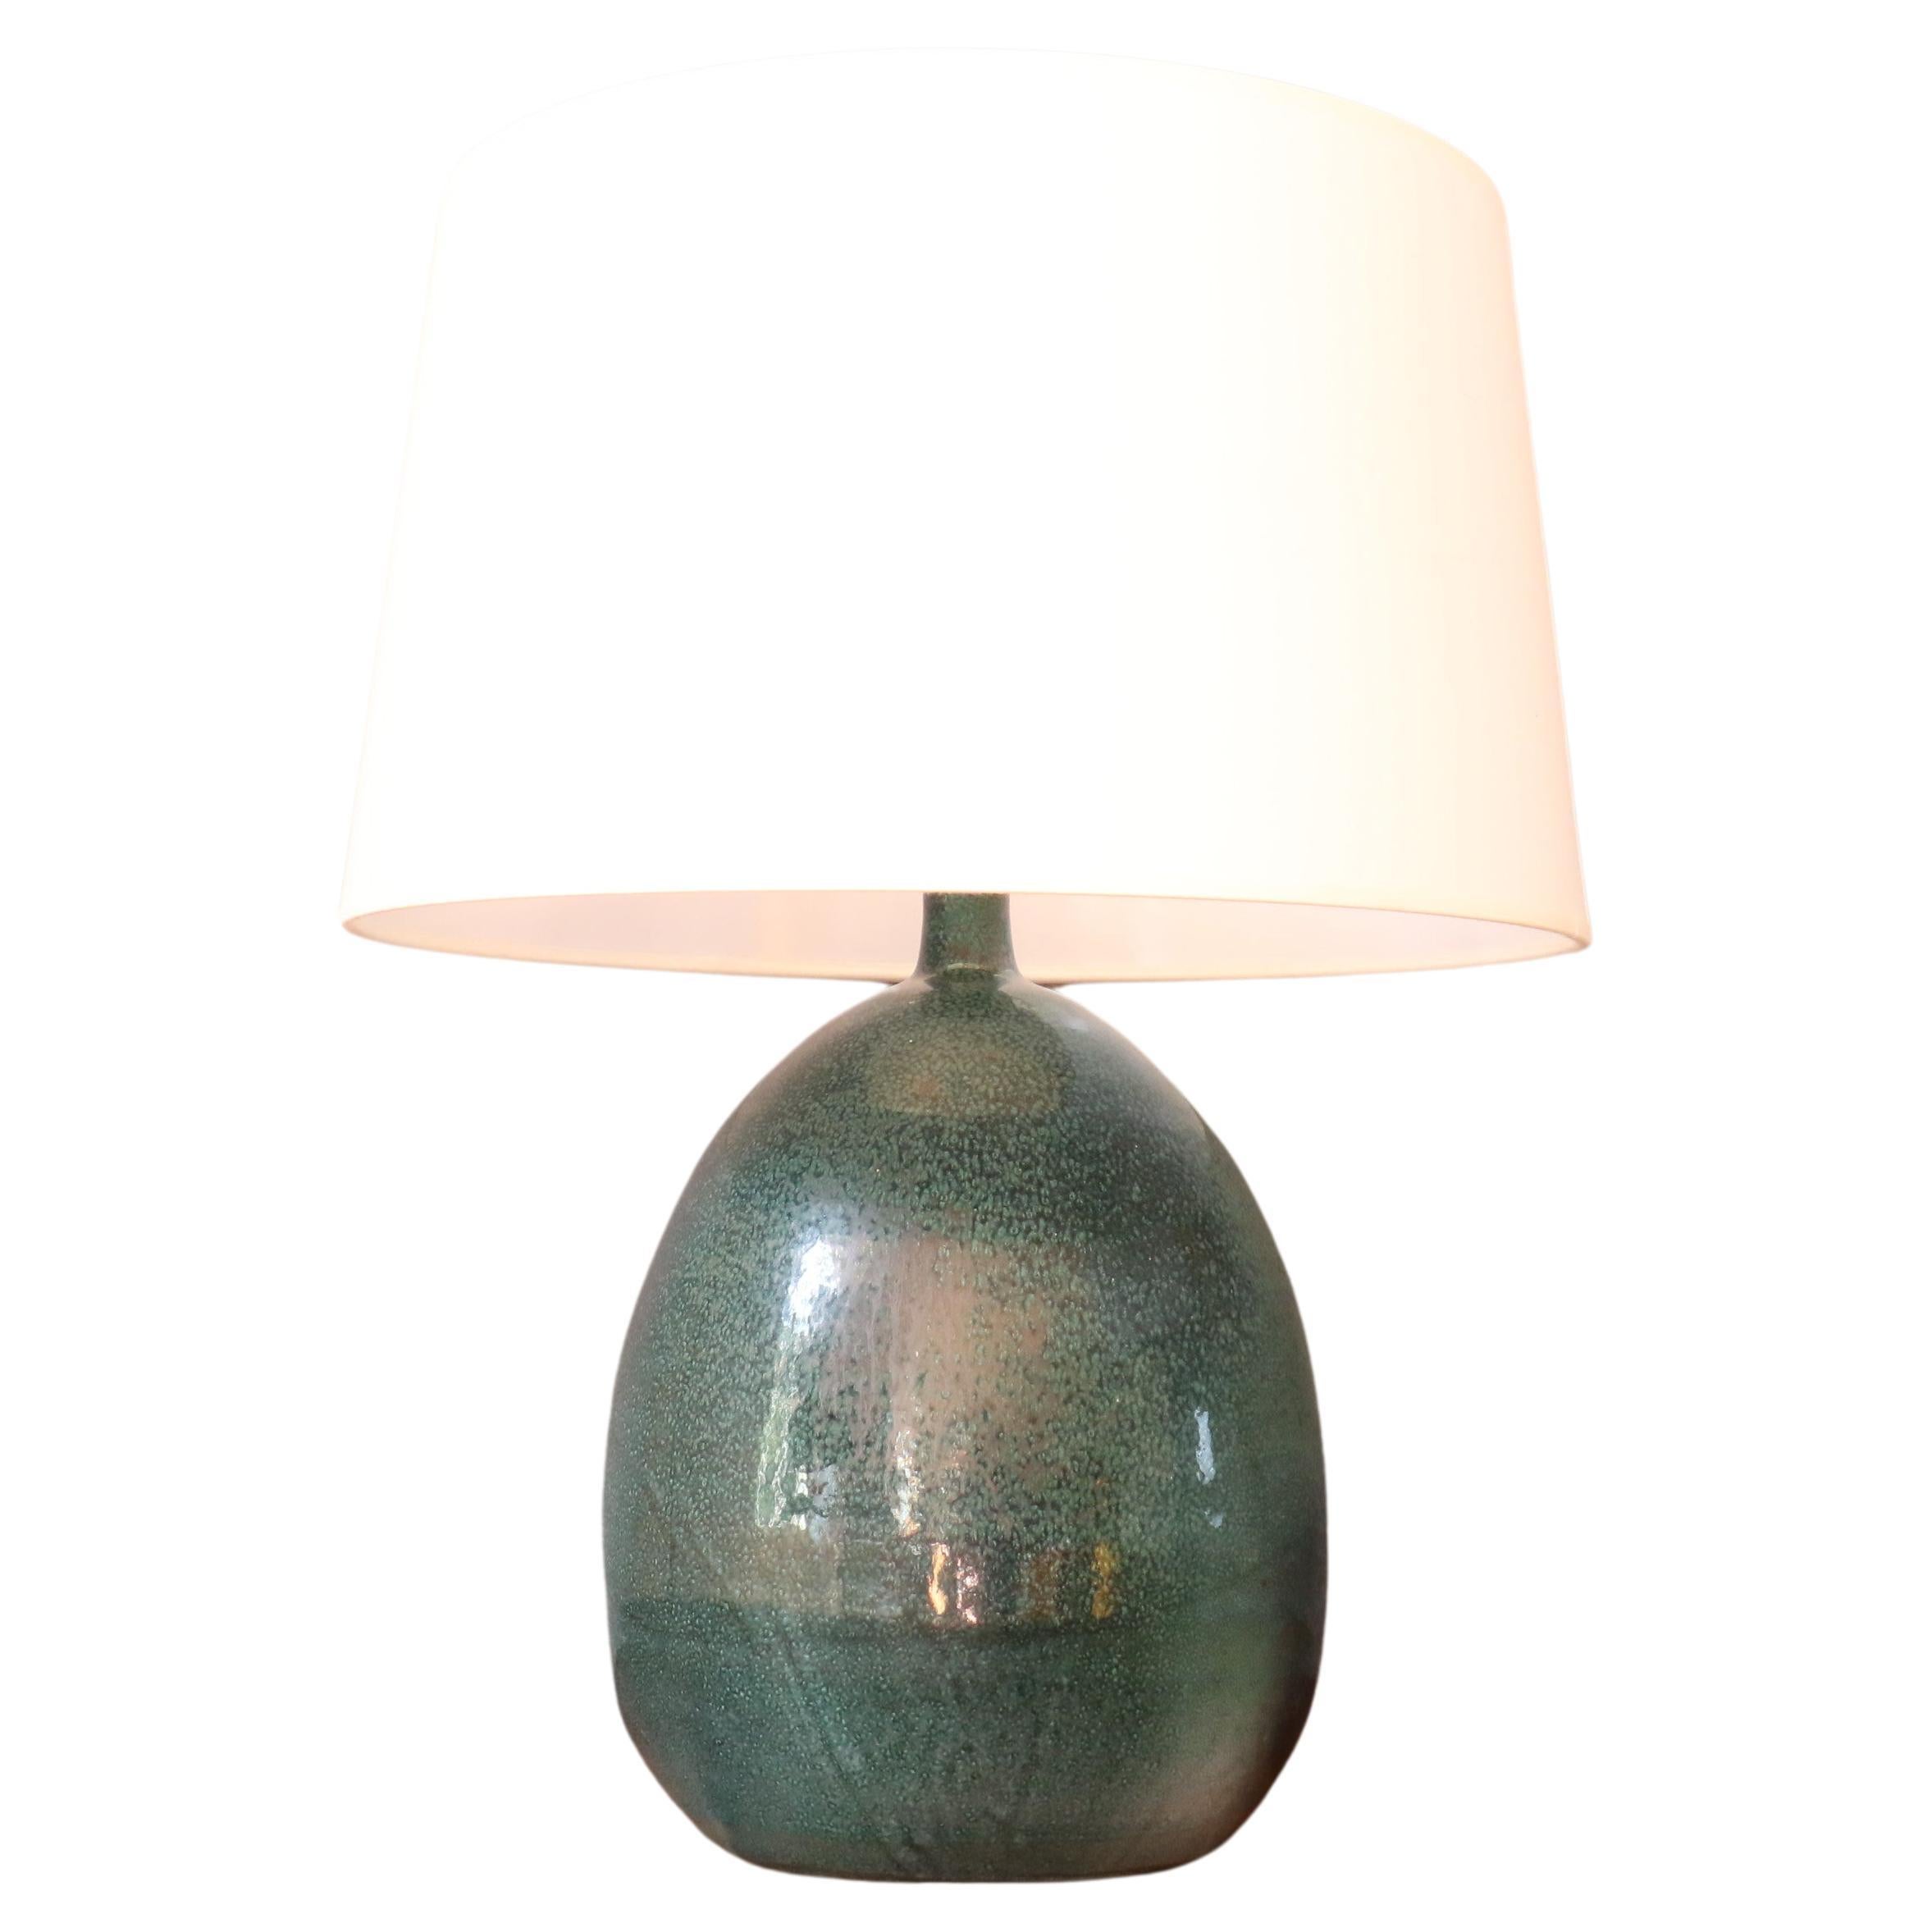 Massive French Ceramic Lamp by Roland Zobel, 1960, era Capron, Jouve, Ruelland

Lovely ceramic lamp by the french ceramist Roland Zobel.
The deep green enamel is very beautiful, shiny and soft to the touch. 

Heigh : 50cm with the lamp shape, 33cm